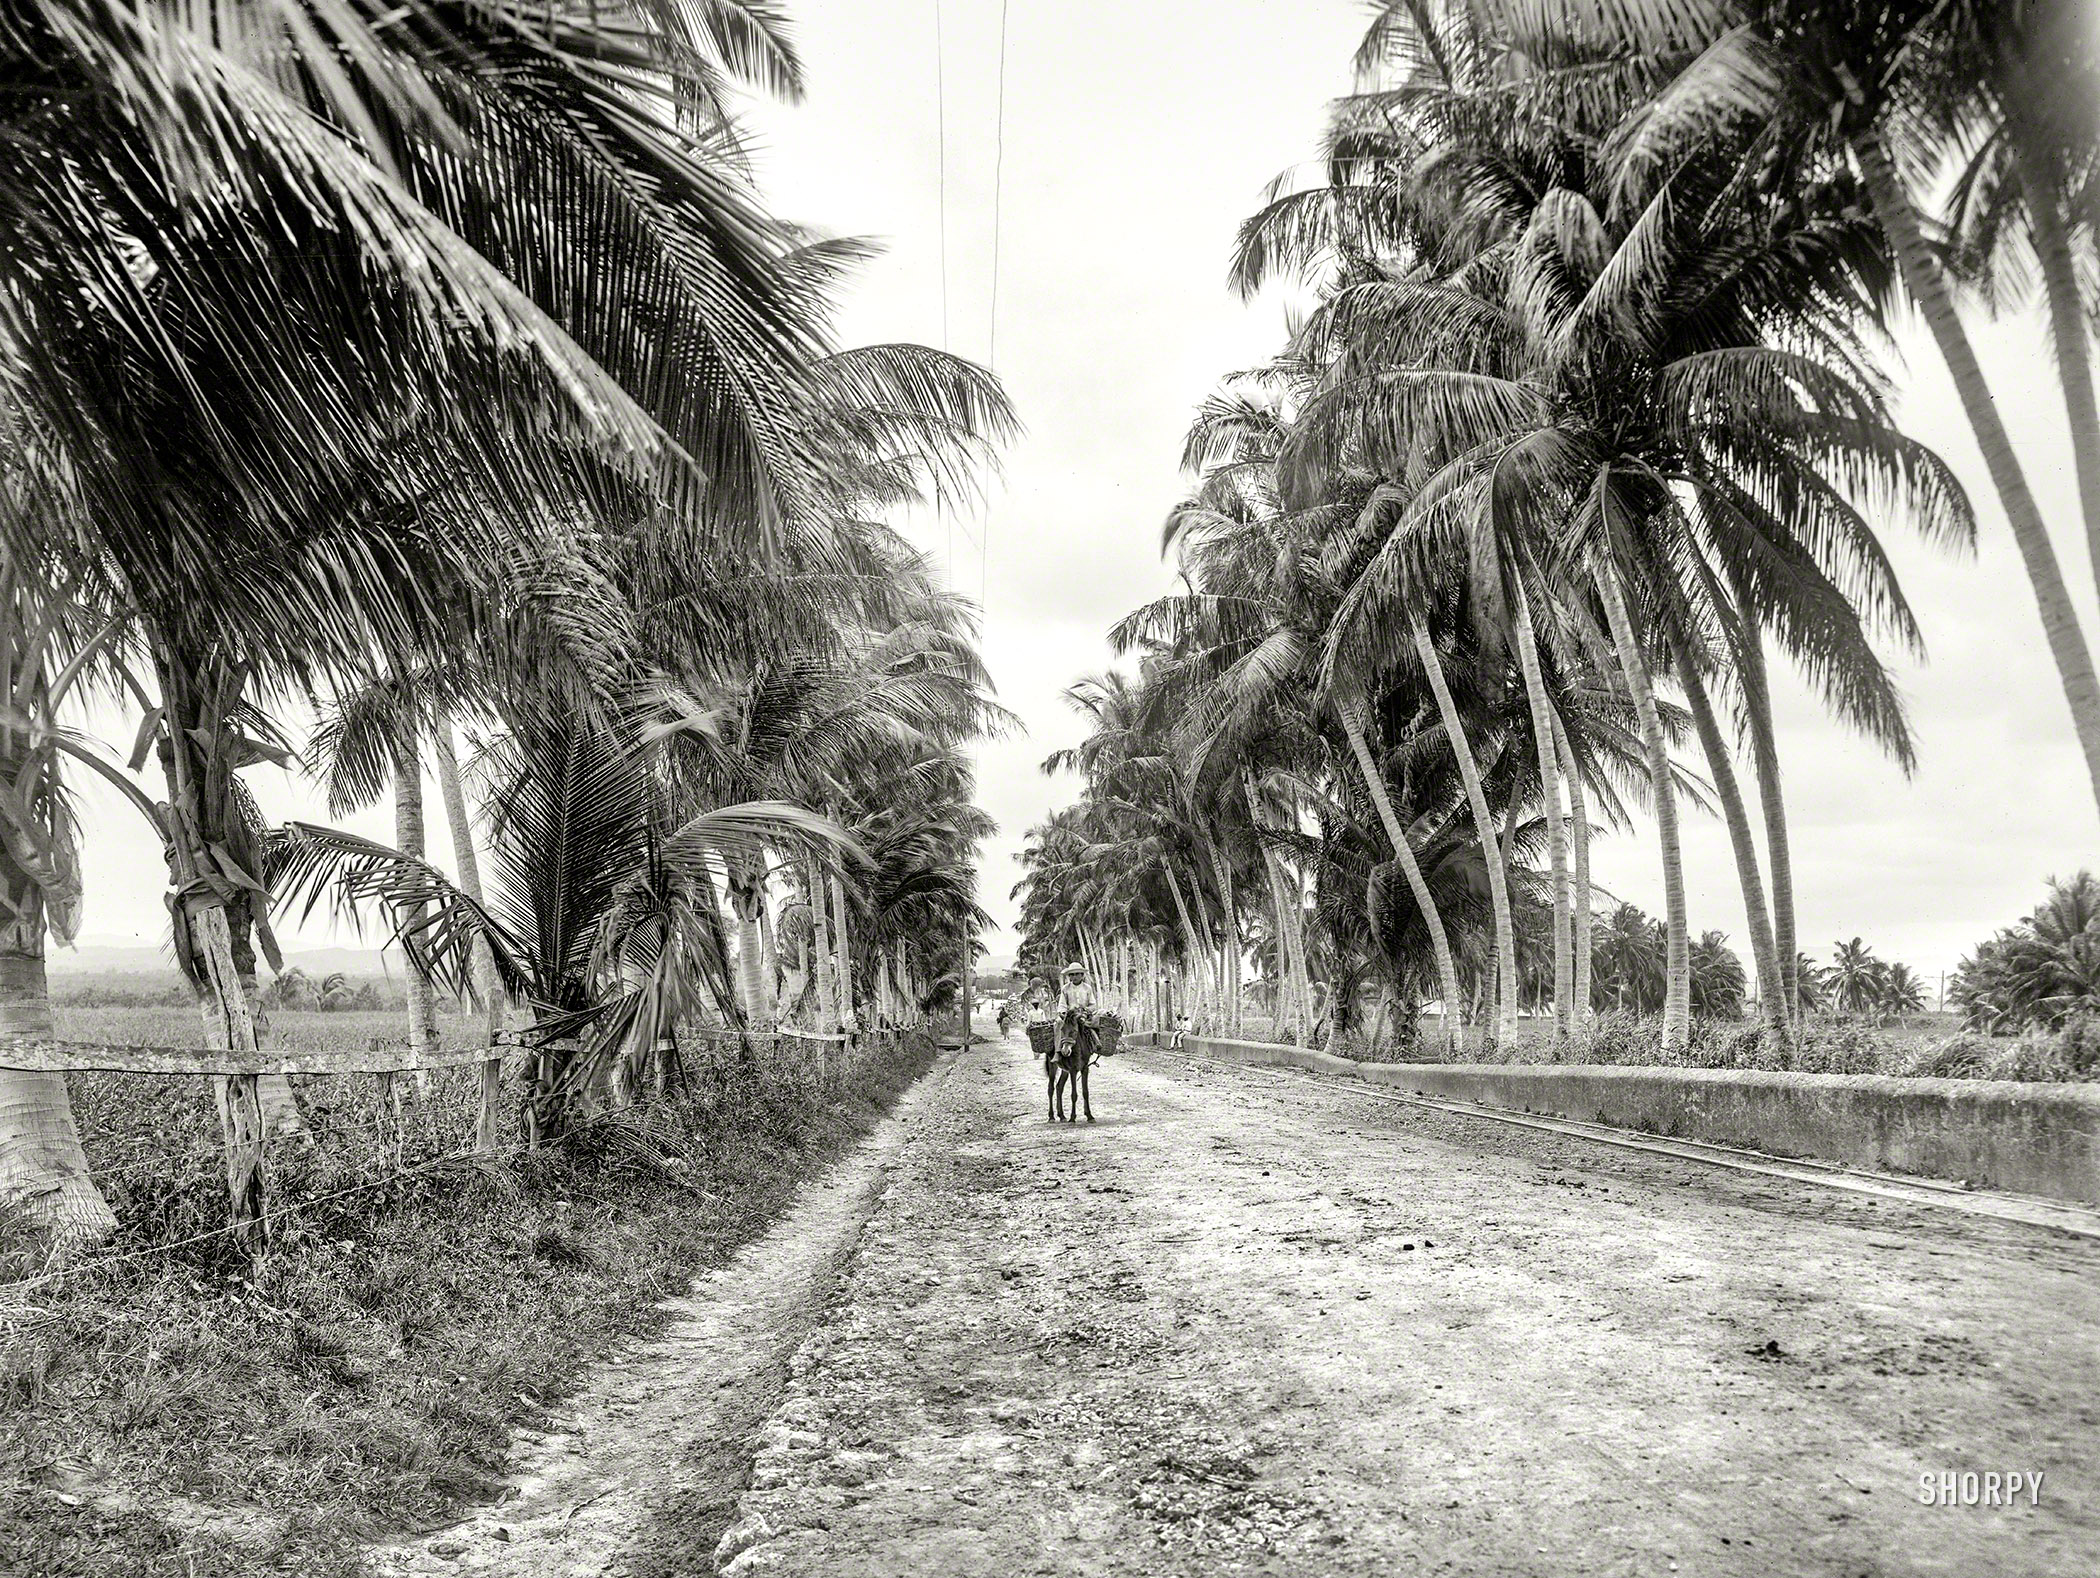 Circa 1901. "The Military Road, San Juan, Puerto Rico." 8x10 inch dry plate glass negative, Detroit Photographic Company. View full size.